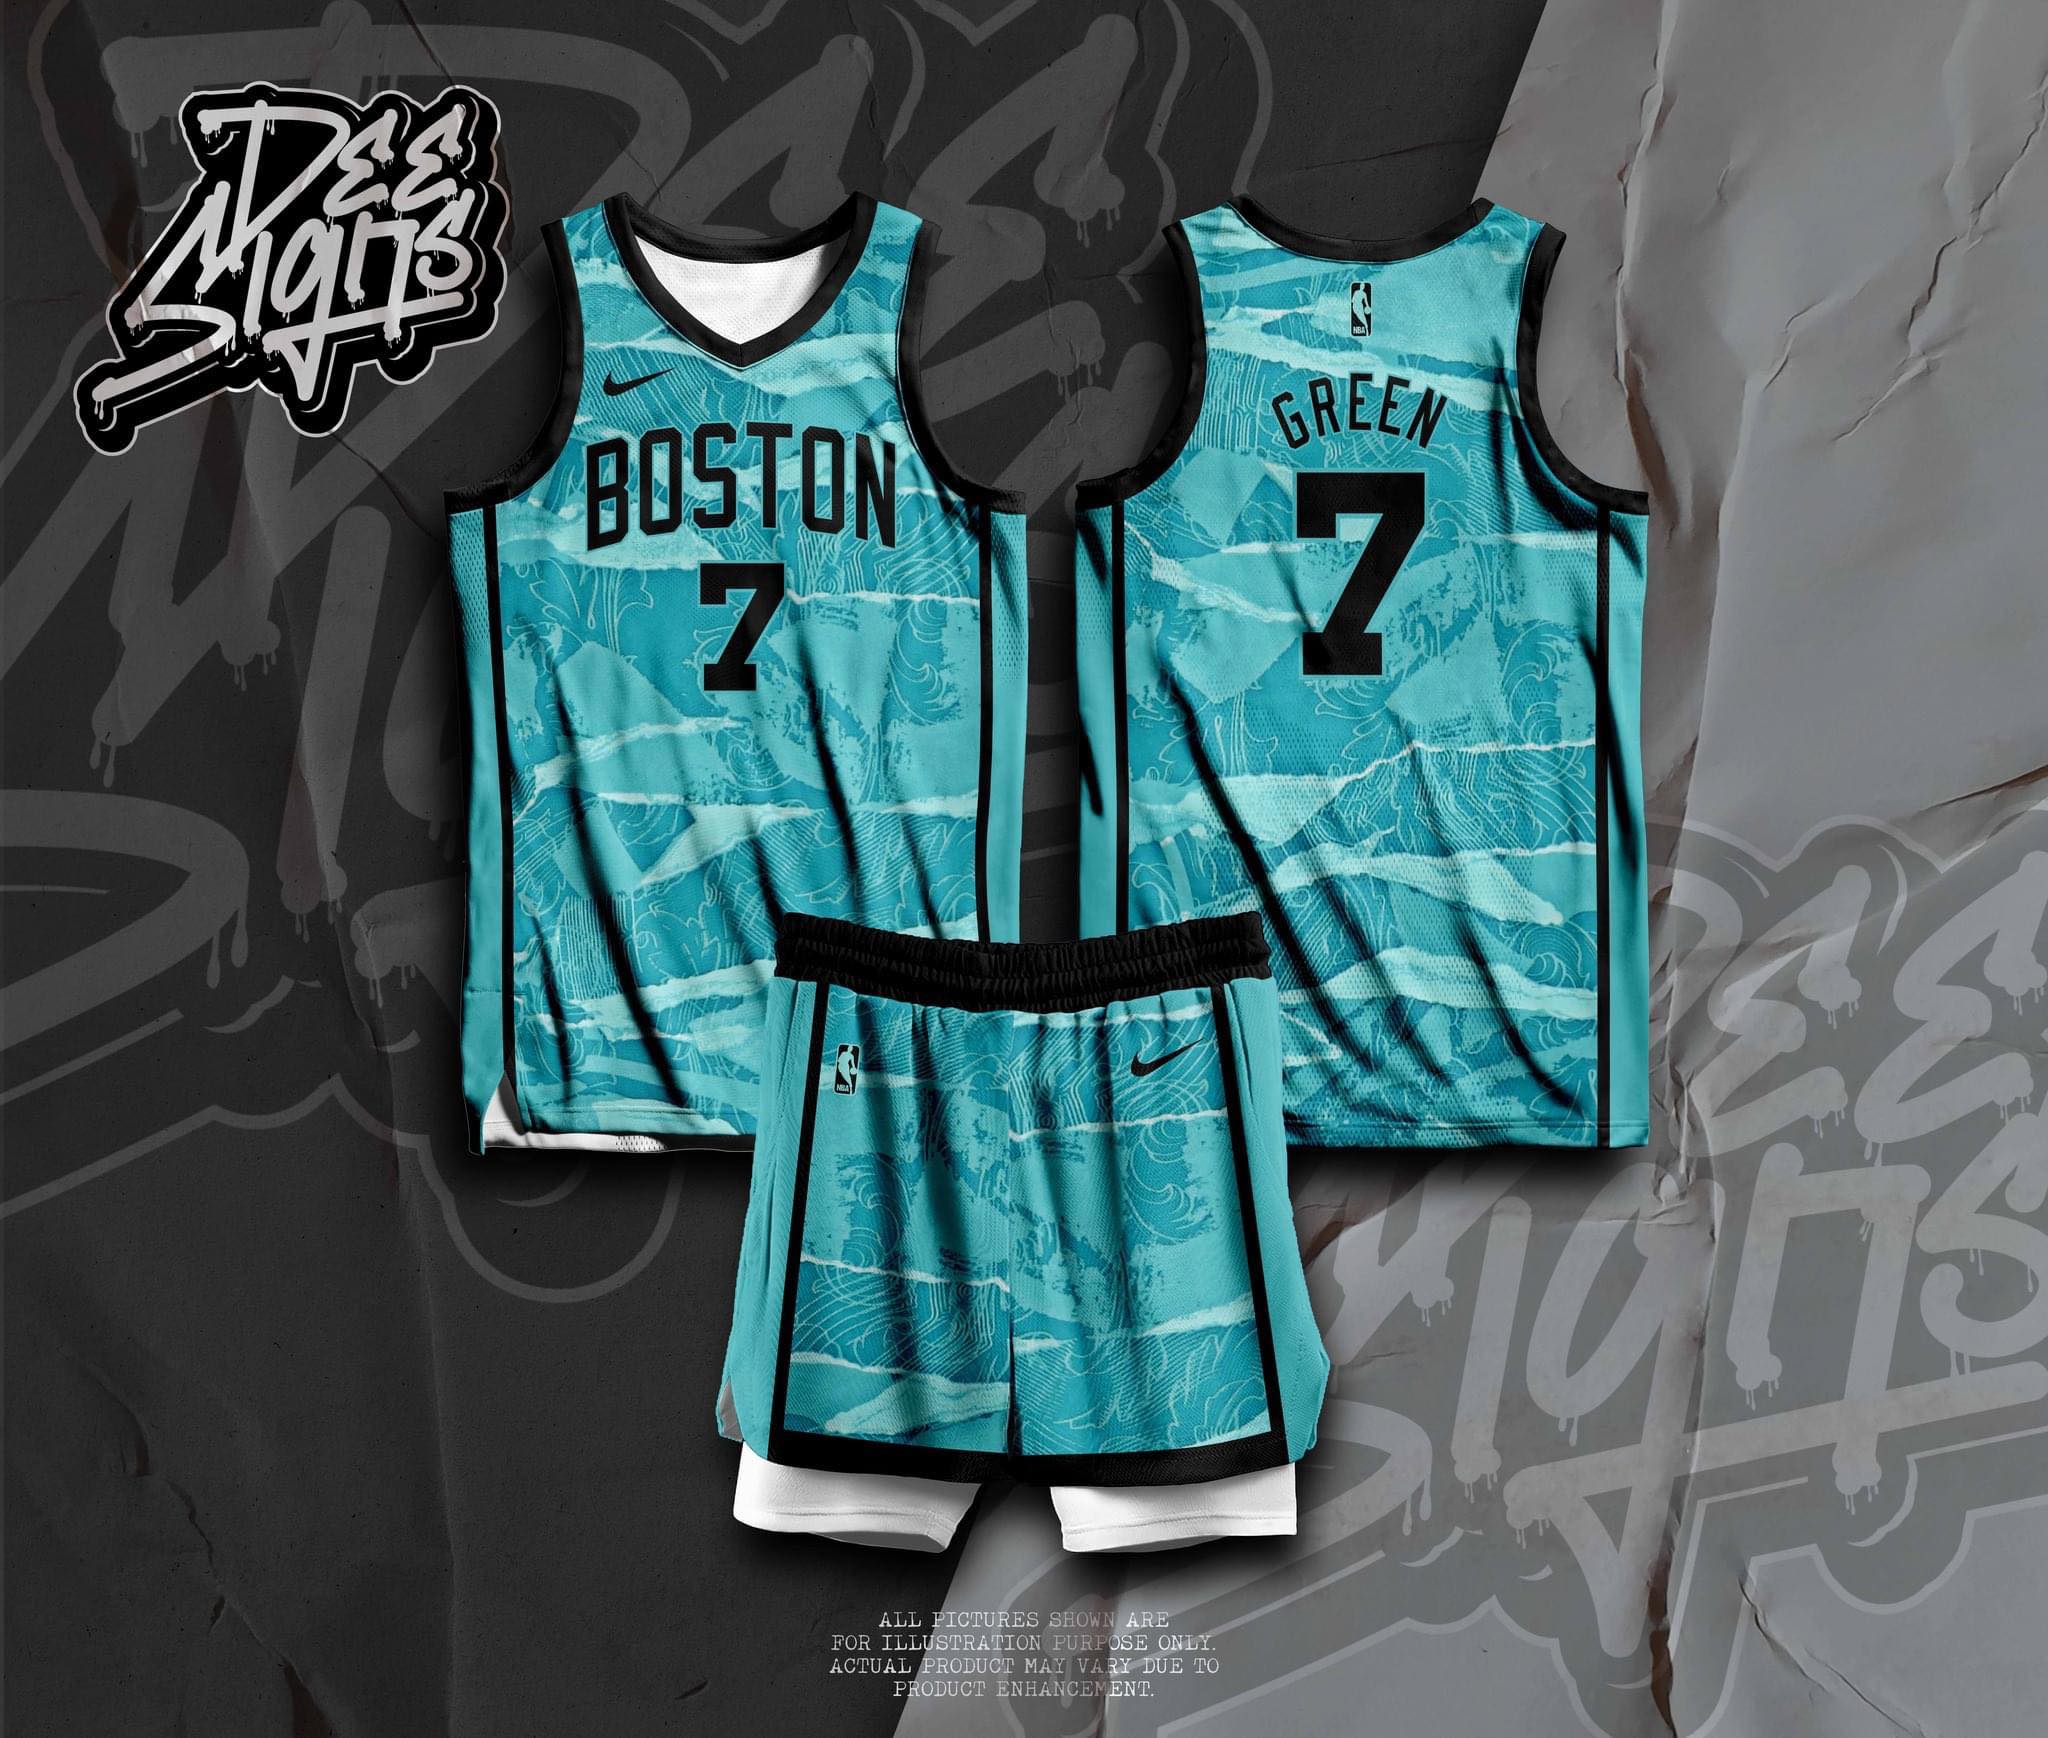 BASKETBALL BOSTON 20 JERSEY FREE CUSTOMIZE OF NAME AND NUMBER ONLY full  sublimation high quality fabrics/ trending jersey